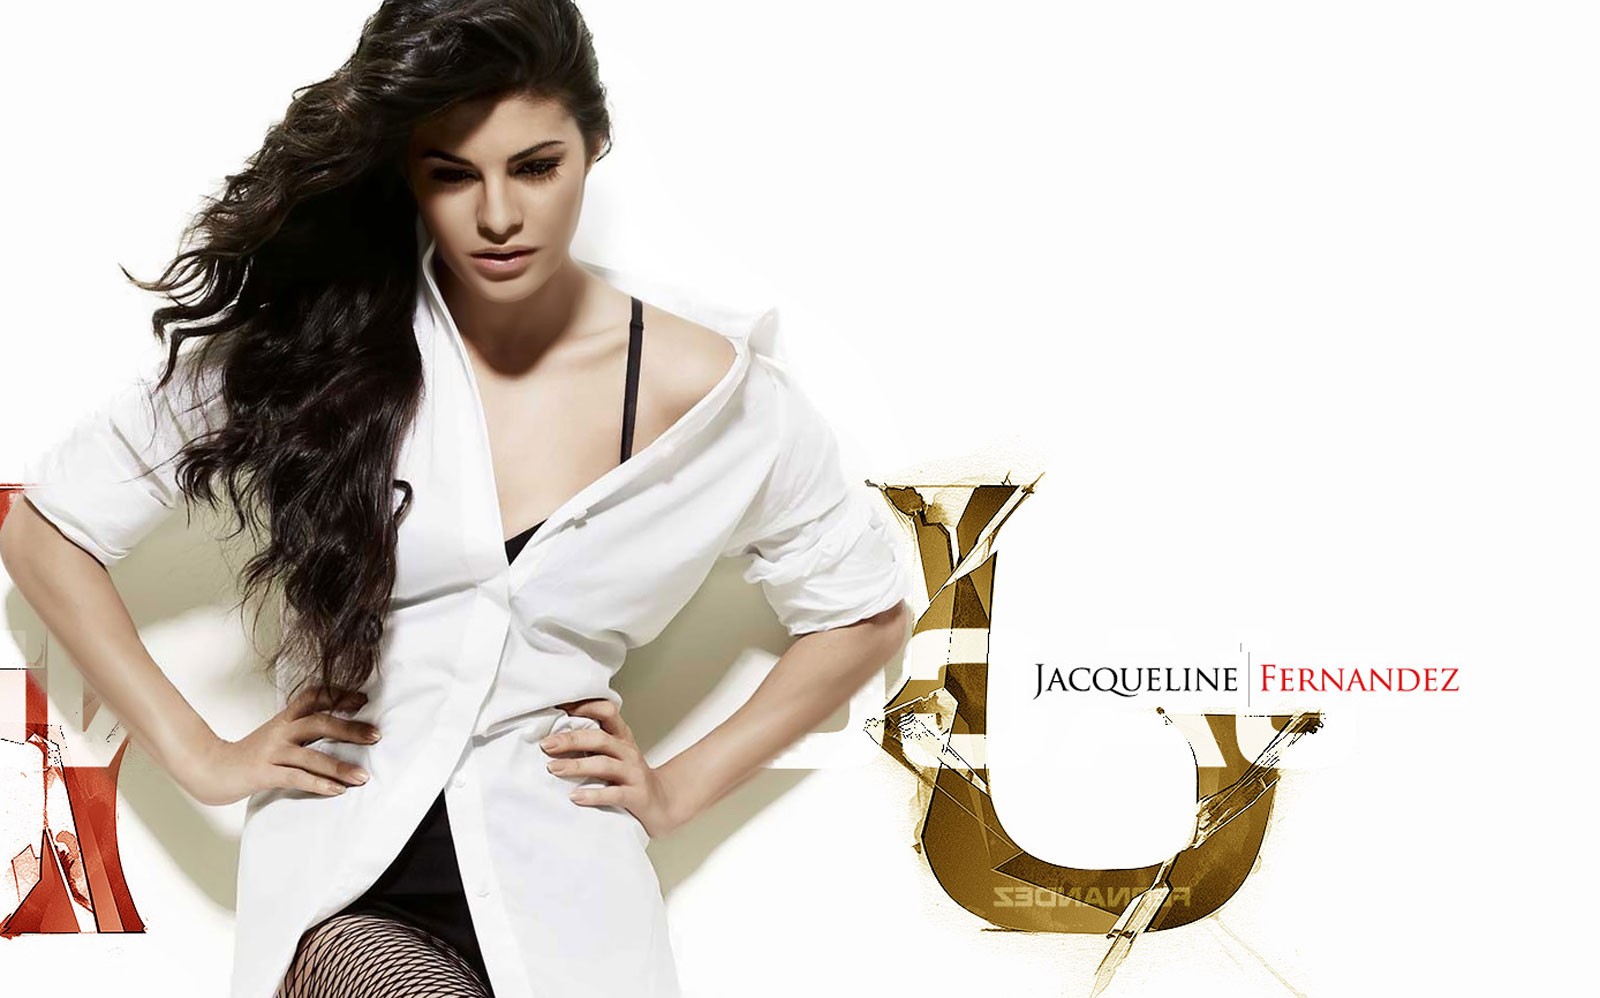 Jacqueline Fernandez, Filmography, Movies, Jacqueline Fernandez News, Videos,  Songs, Images, Box Office, Trailers, Interviews - Bollywood Hungama